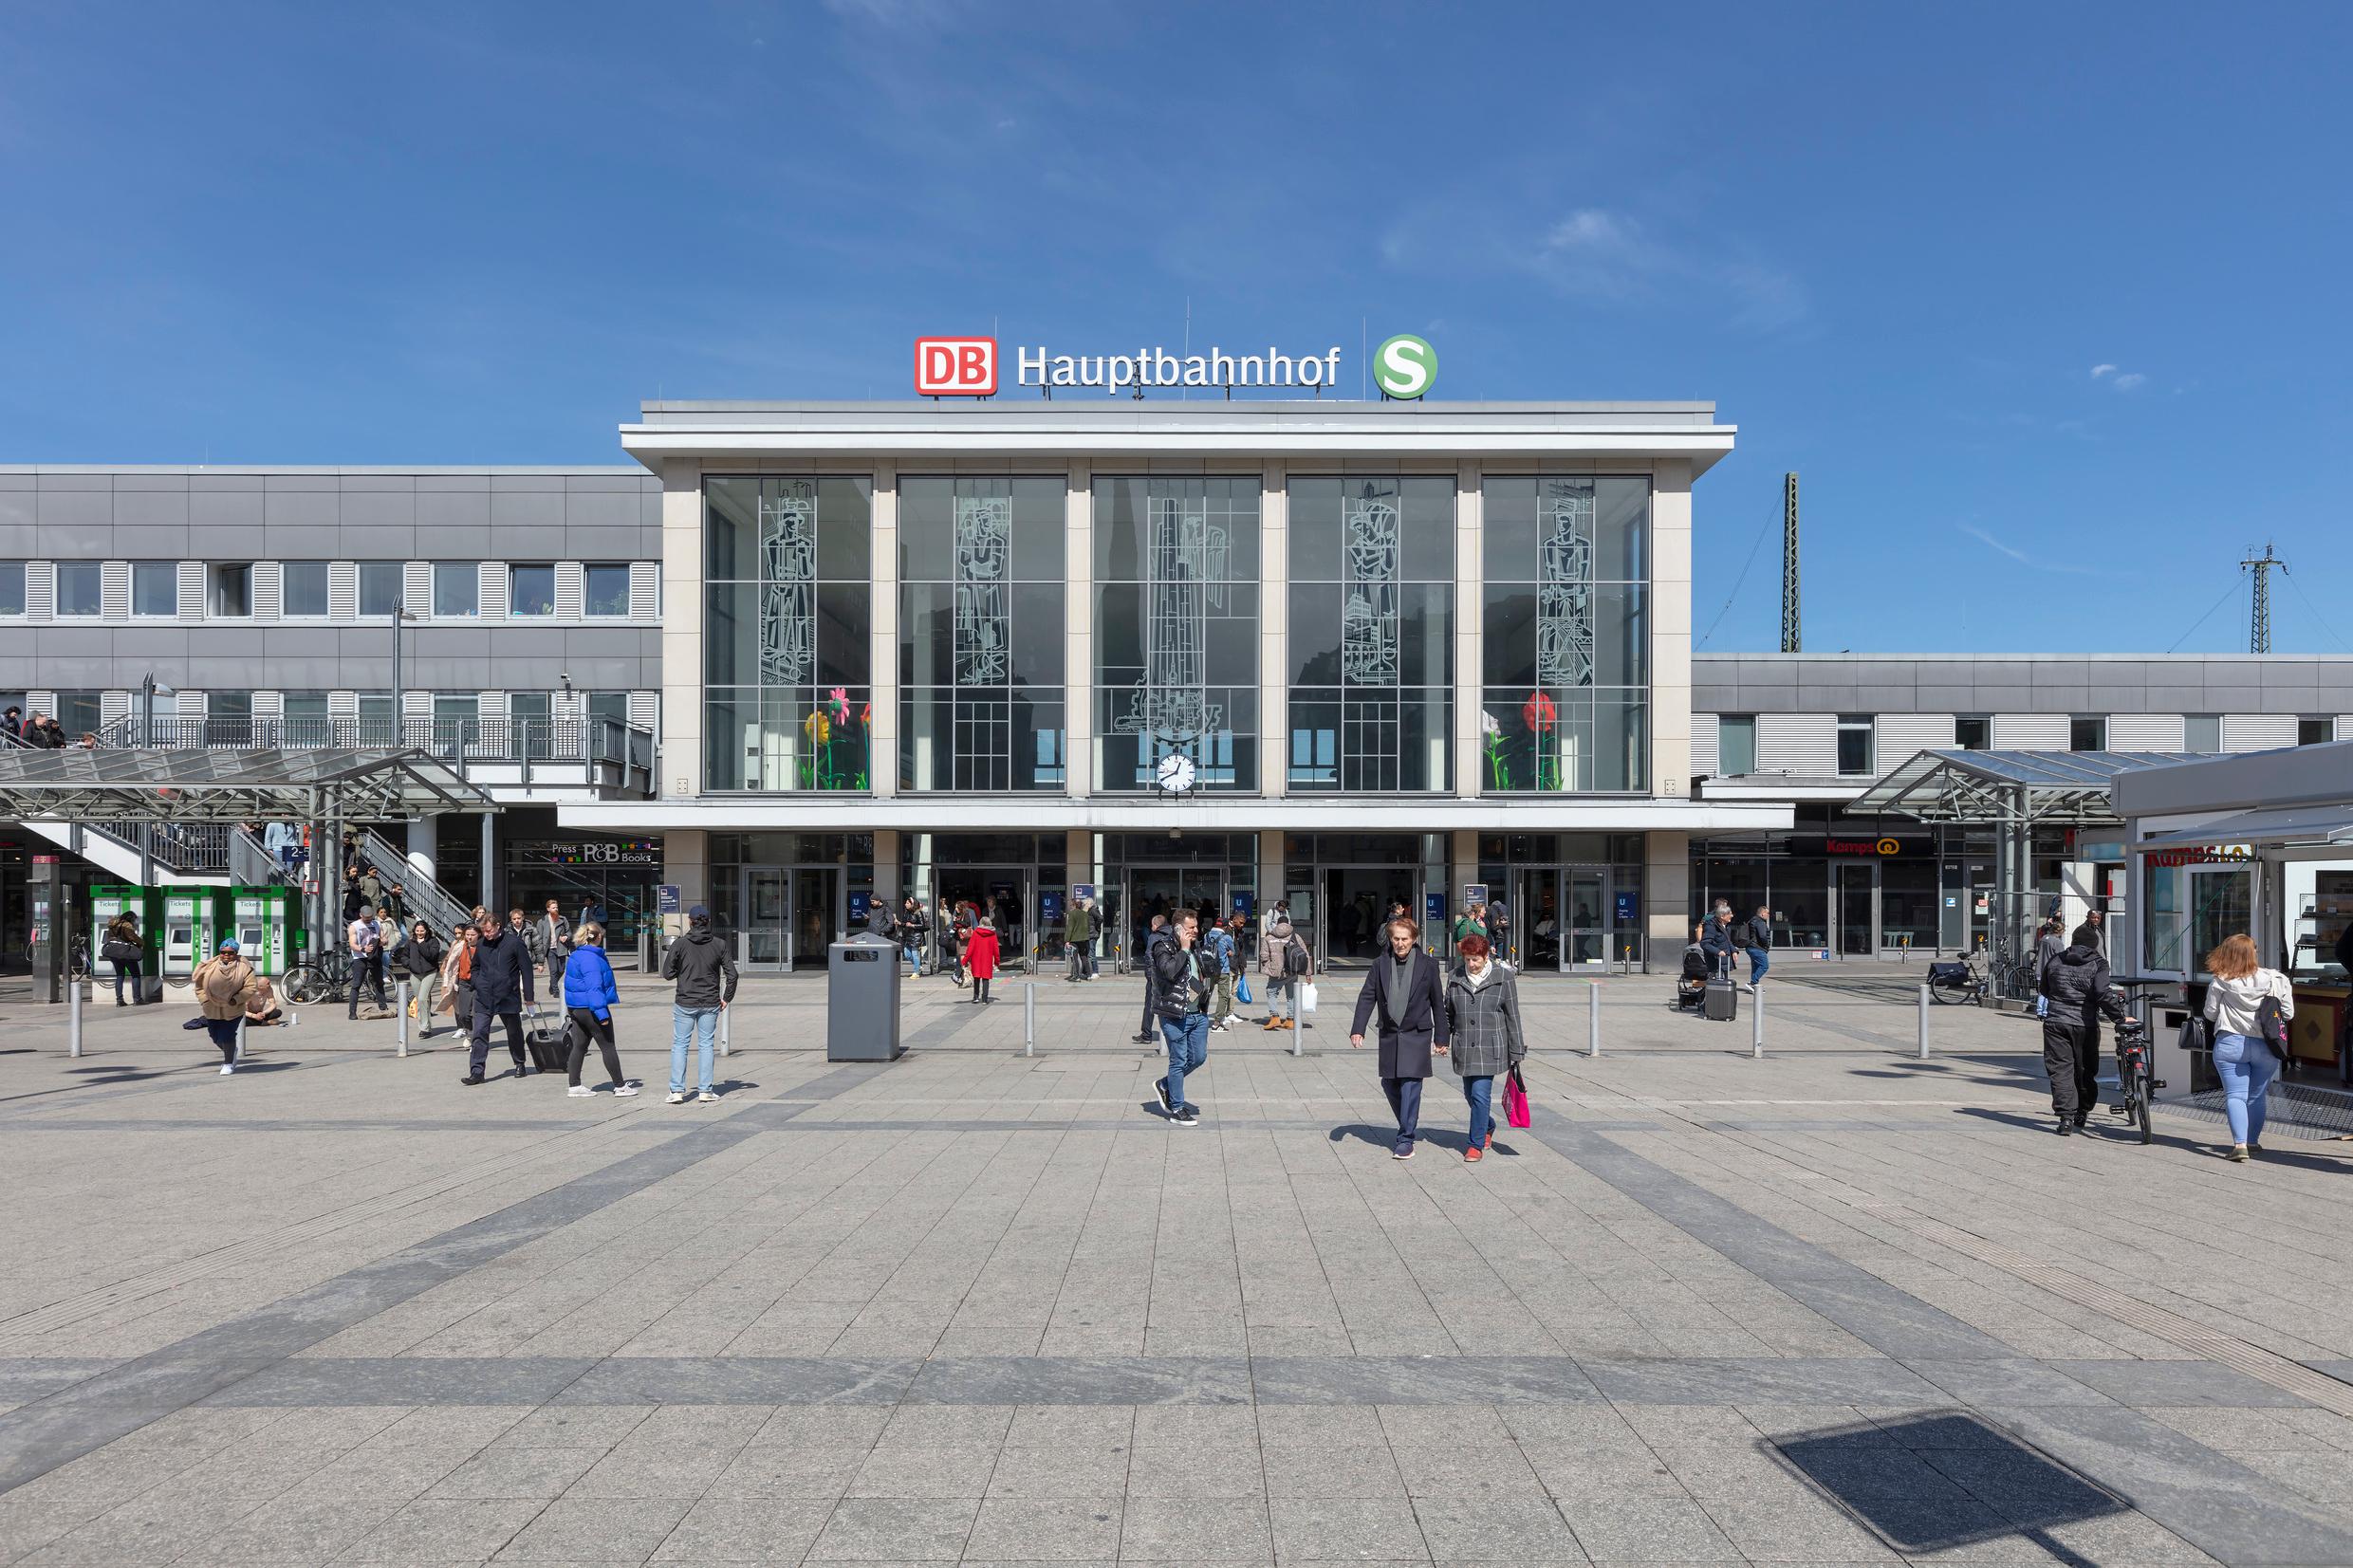 A view of the station building of Dortmund Hauptbahnhof.